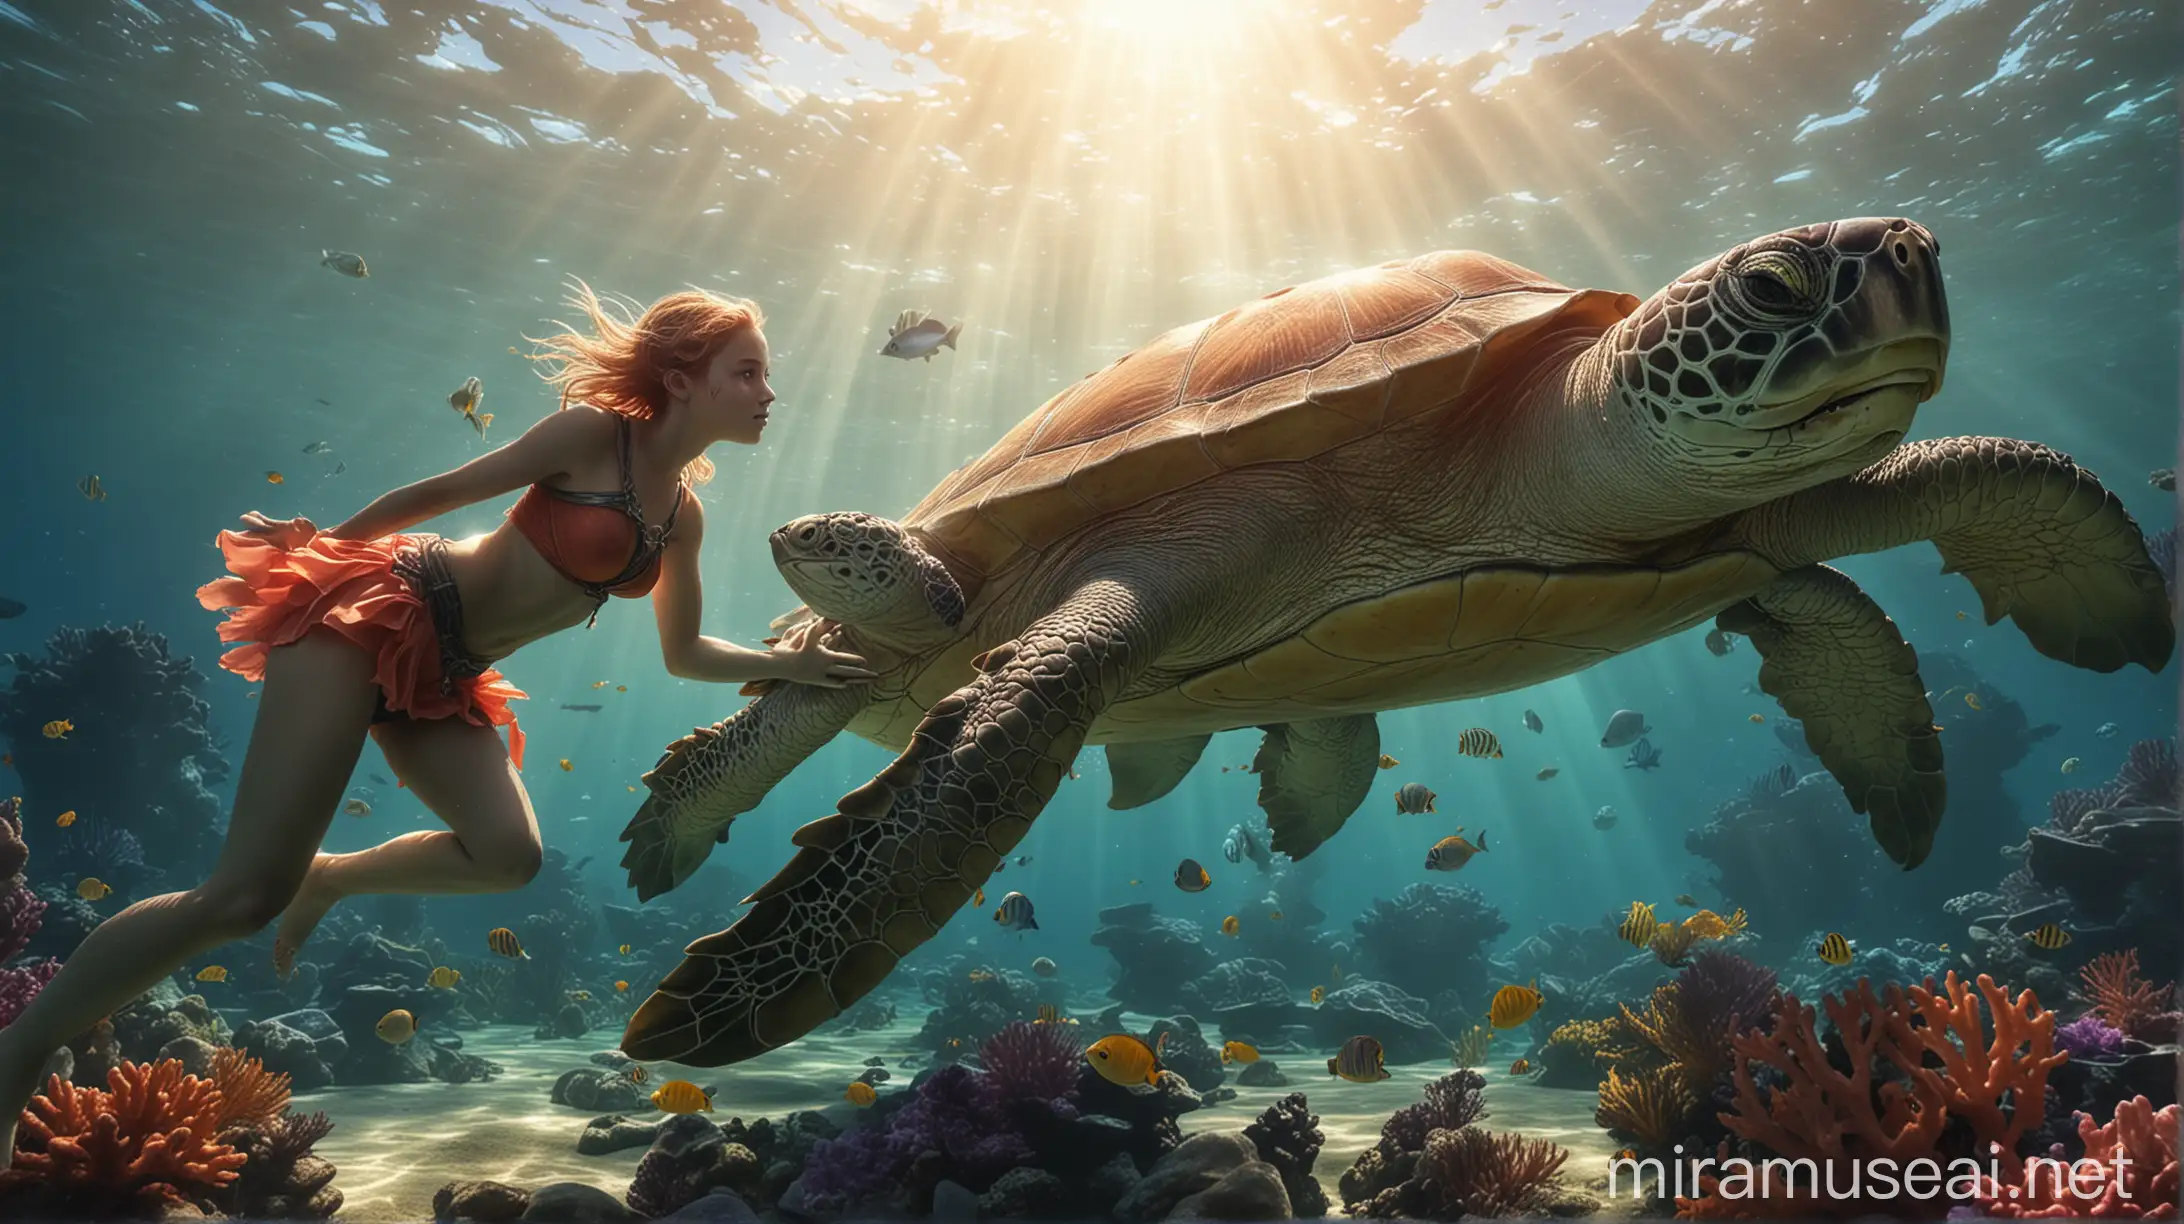 Magical Underwater Elf Riding Giant Turtle in Colorful Coral Reef